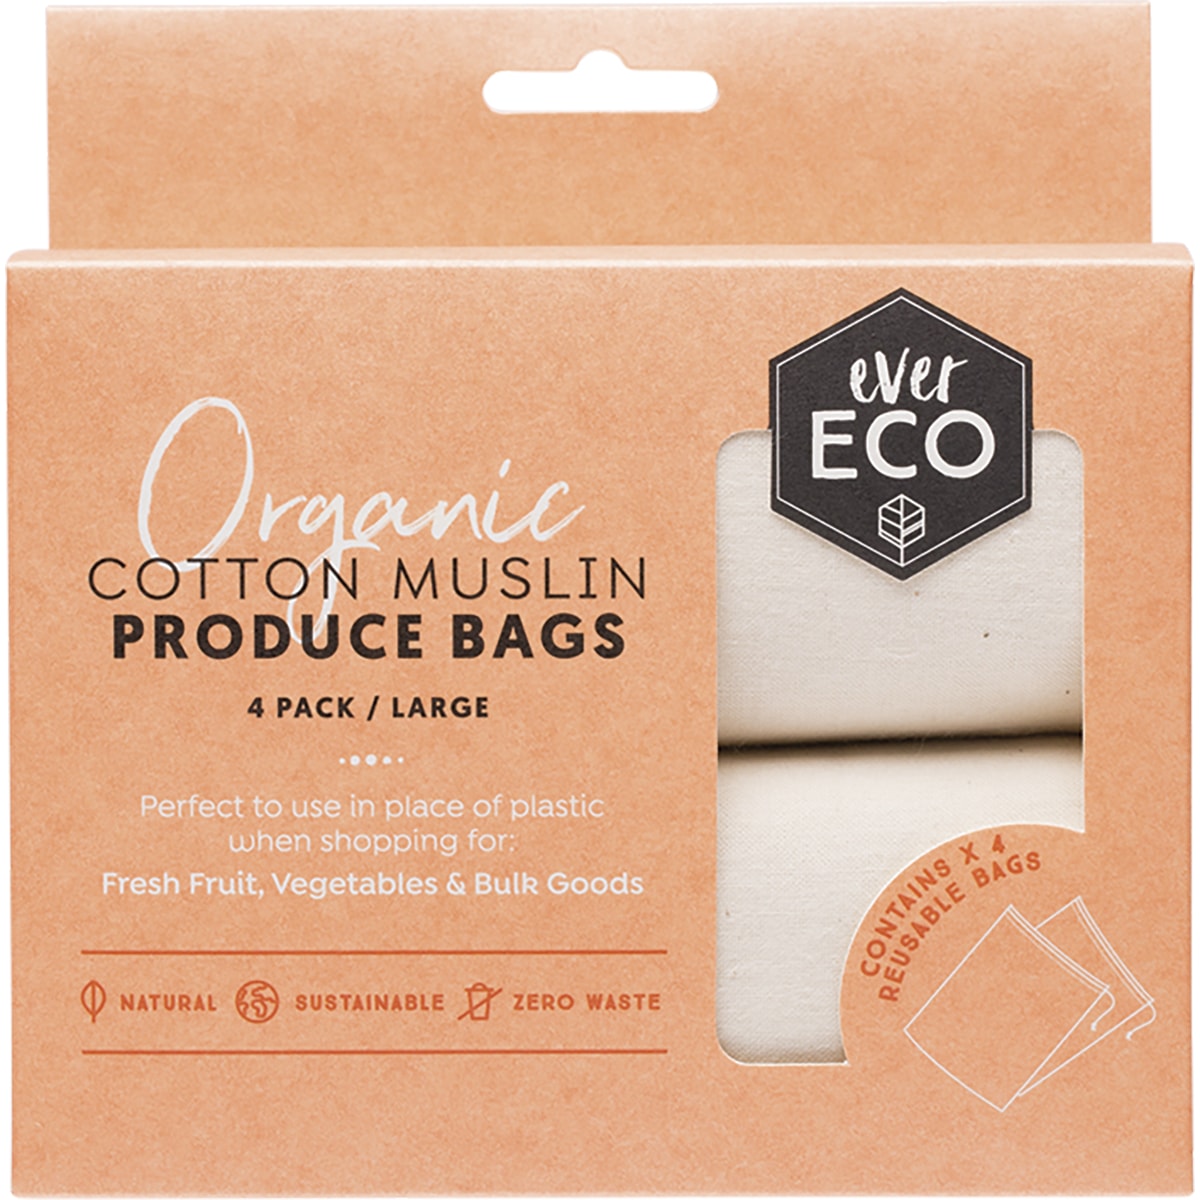 Ever Eco - Organic Cotton Muslin Produce Bags (4 Pack)